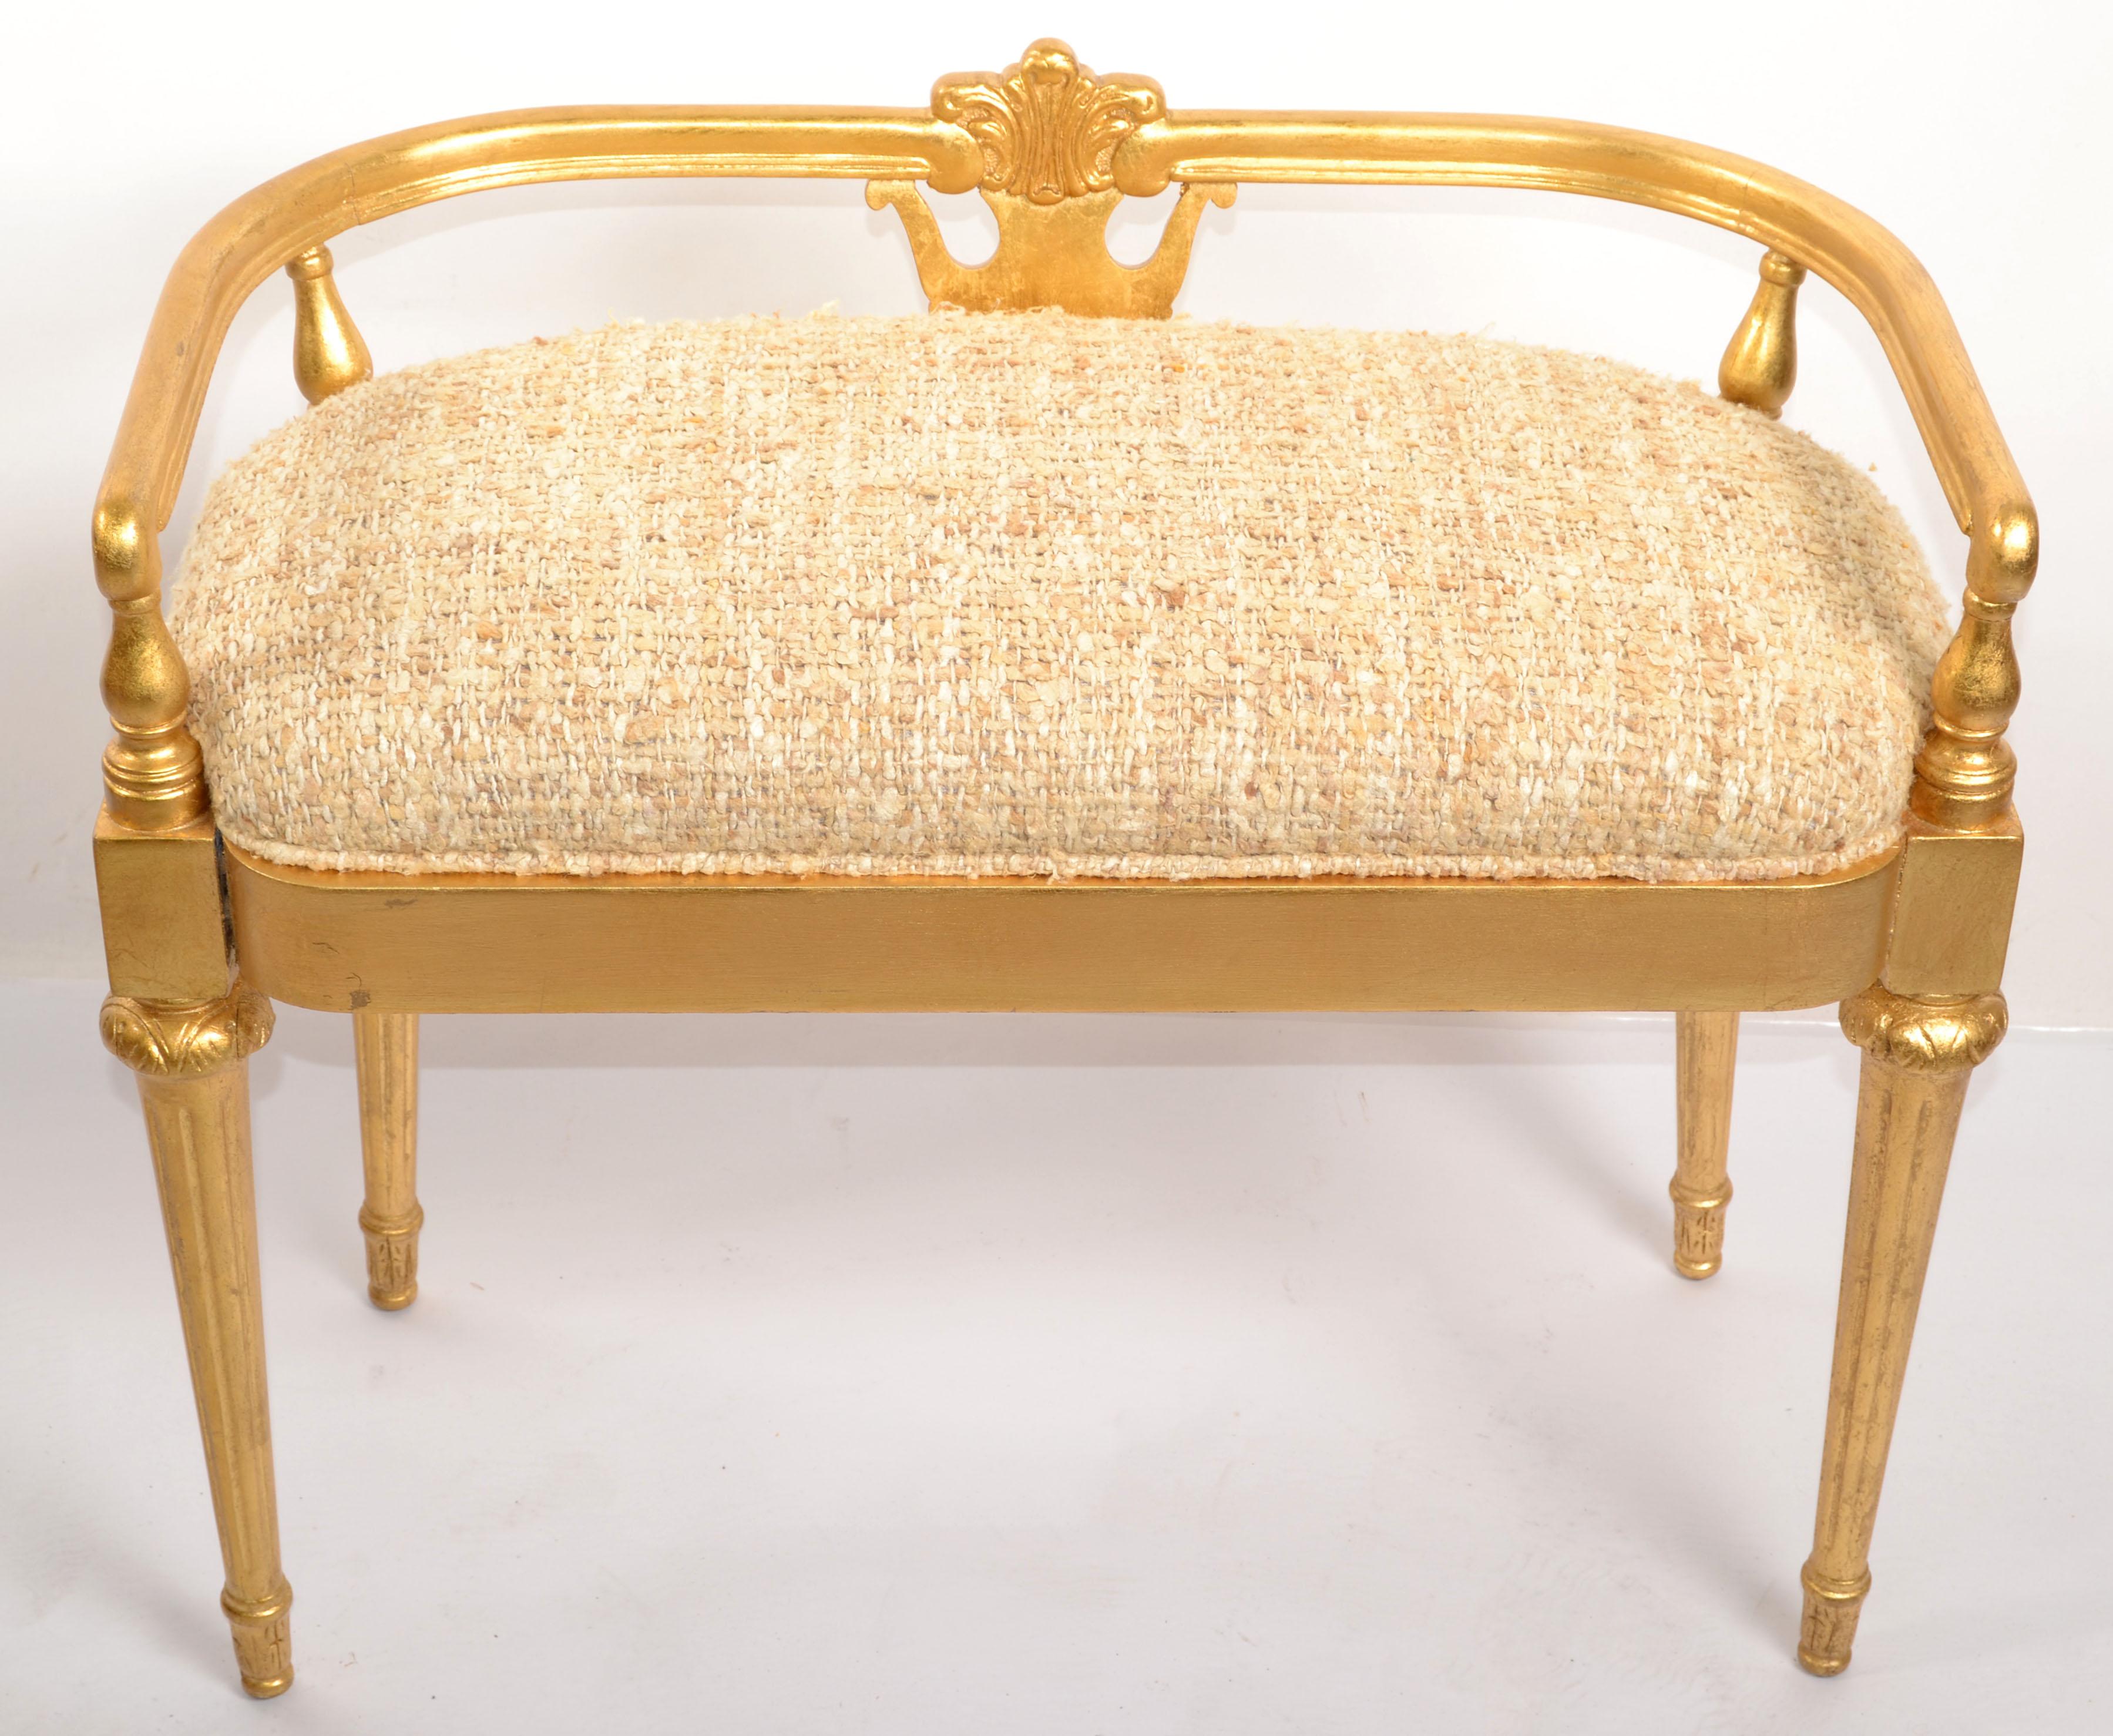 An elegant French 20th Century Louis XIV Style giltwood bench. The decorative bench is raised on four legs with topie shape feet below a circular fluted tapered column. Above is the giltwood frieze with an elegant, mottled design below the